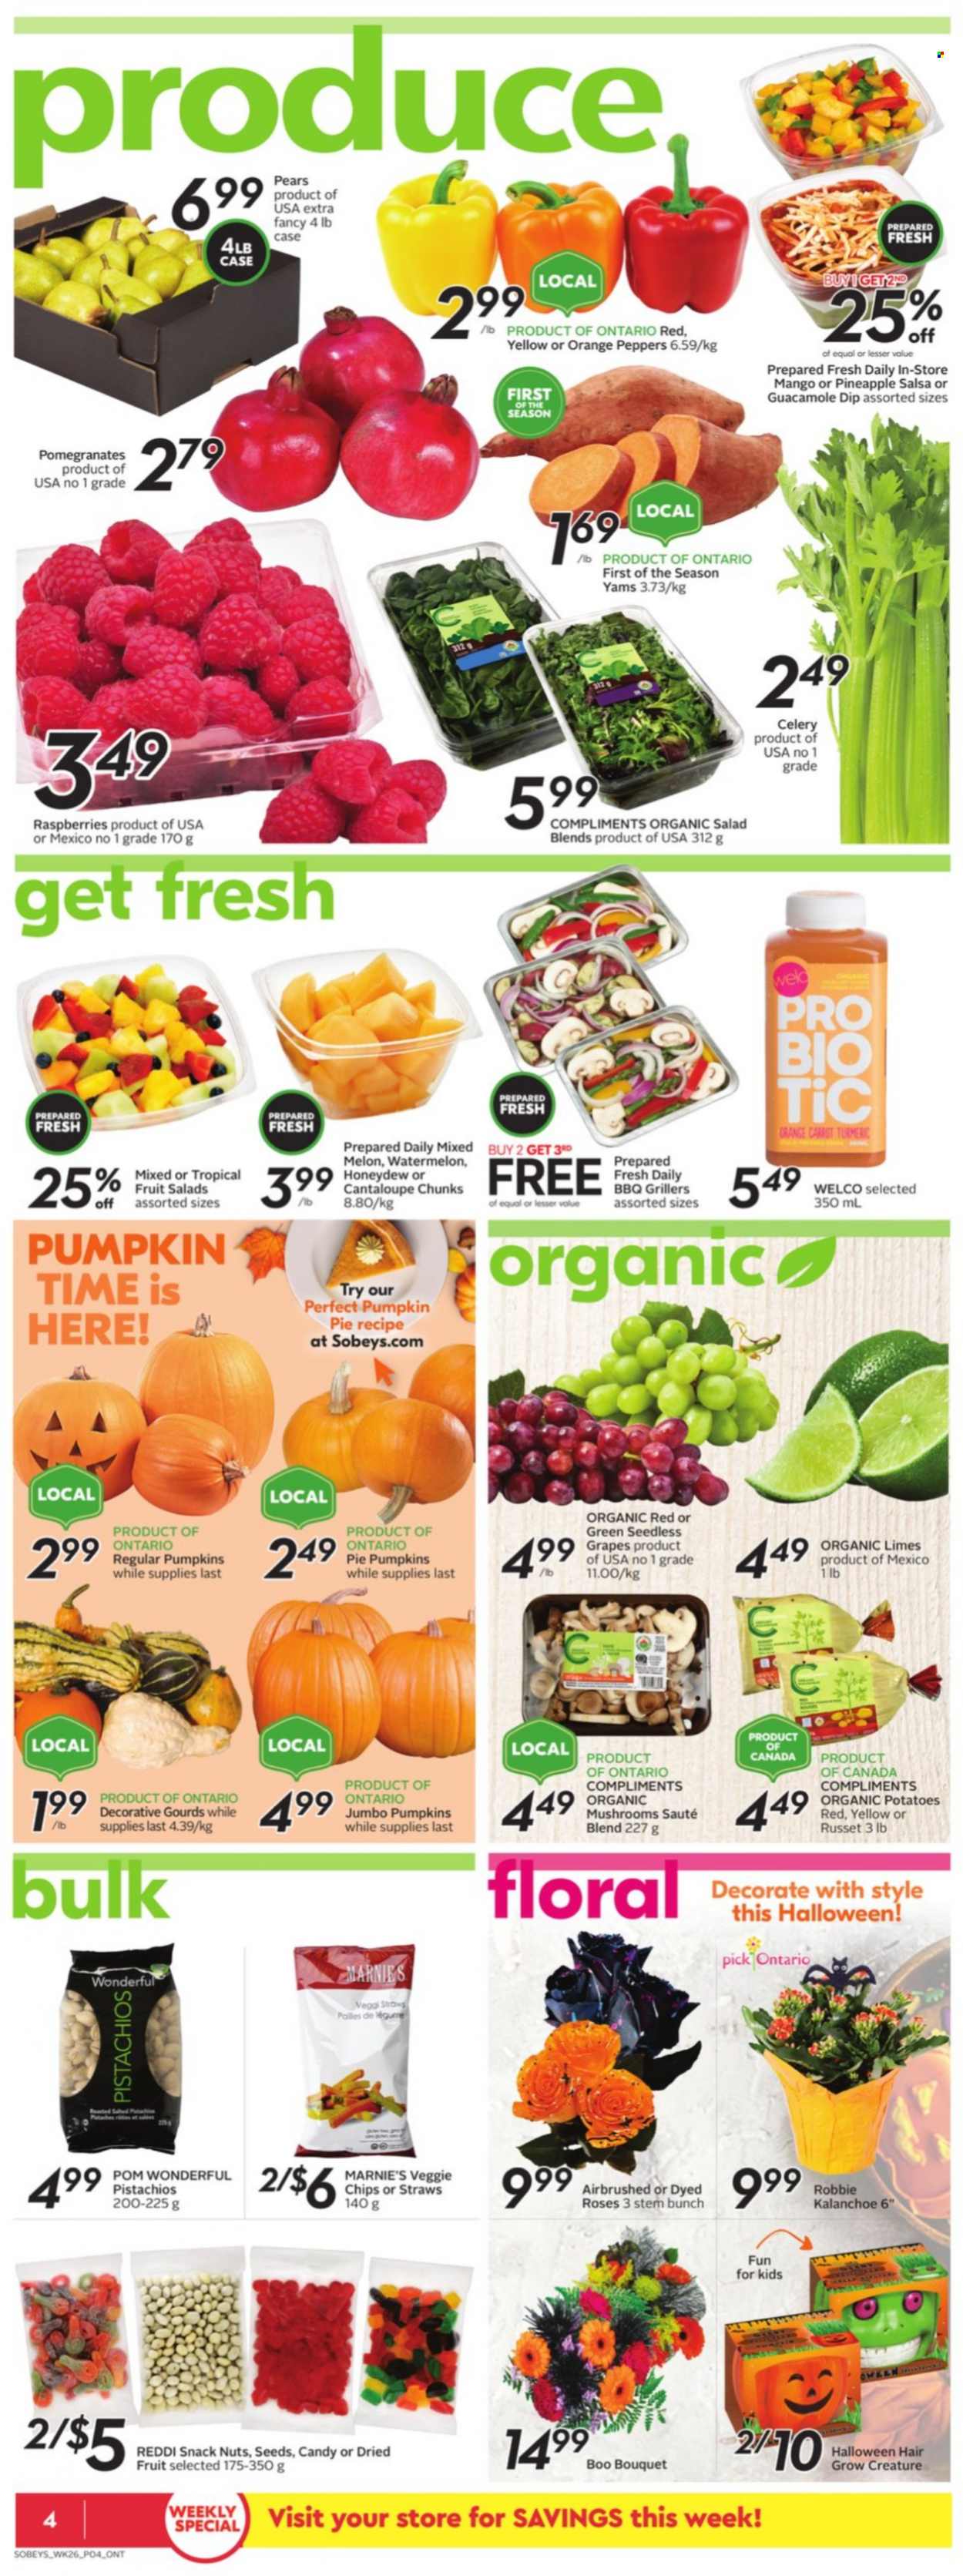 thumbnail - Sobeys Flyer - October 21, 2021 - October 27, 2021 - Sales products - russet potatoes, potatoes, grapes, limes, seedless grapes, watermelon, honeydew, pears, melons, pomegranate, guacamole, snack, turmeric, salsa, dried fruit, pistachios, chips, oranges. Page 4.